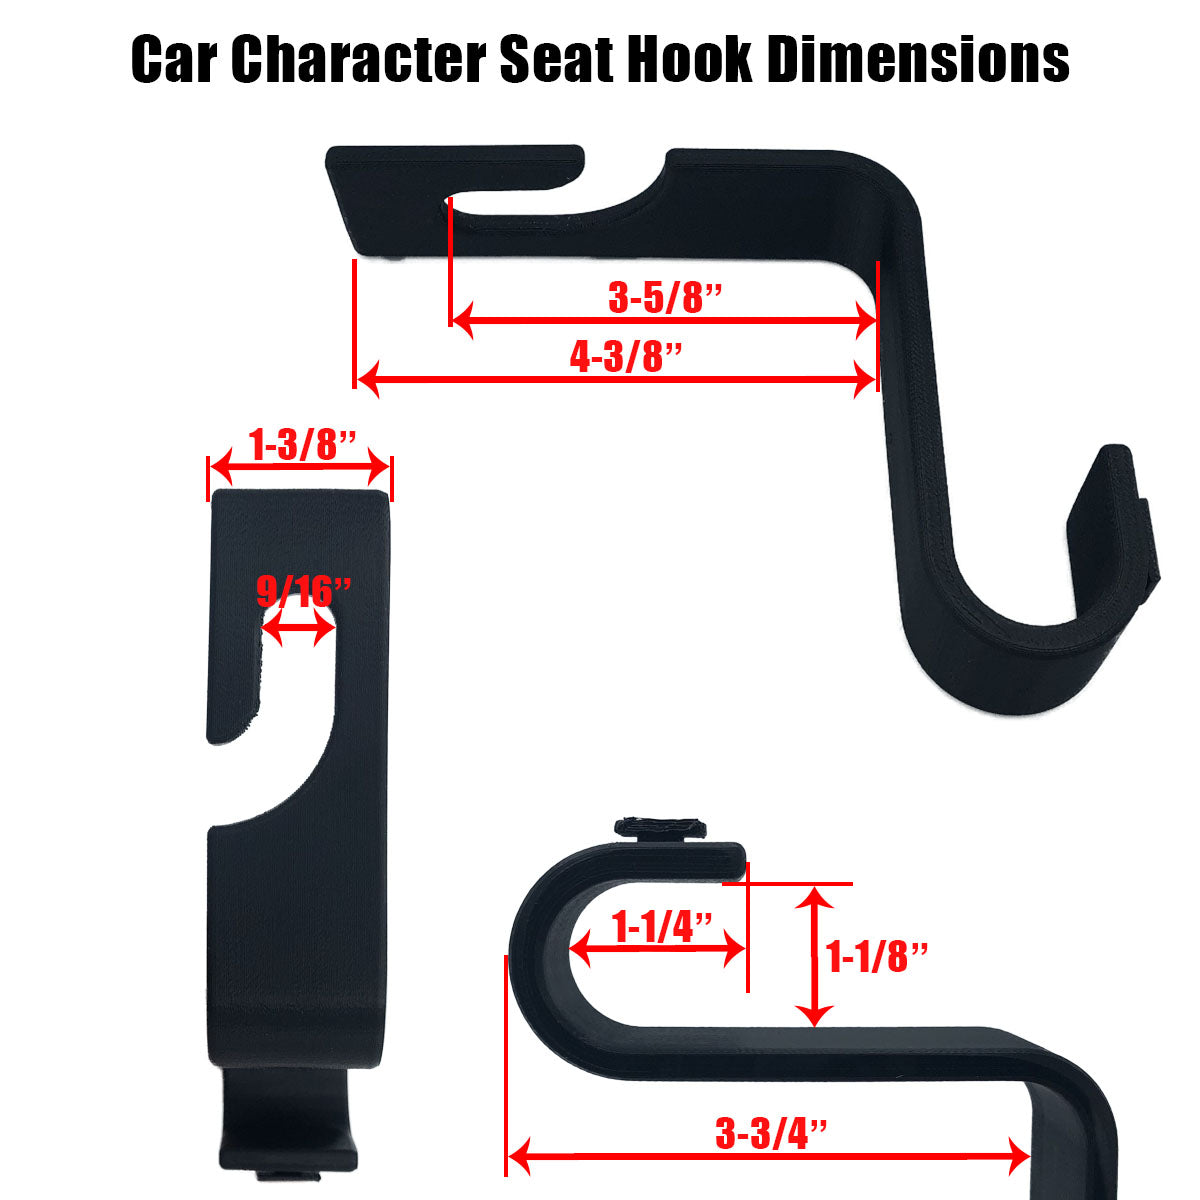 Pair Car Character Seat Hooks (Specialty Themed) - Storage Hook